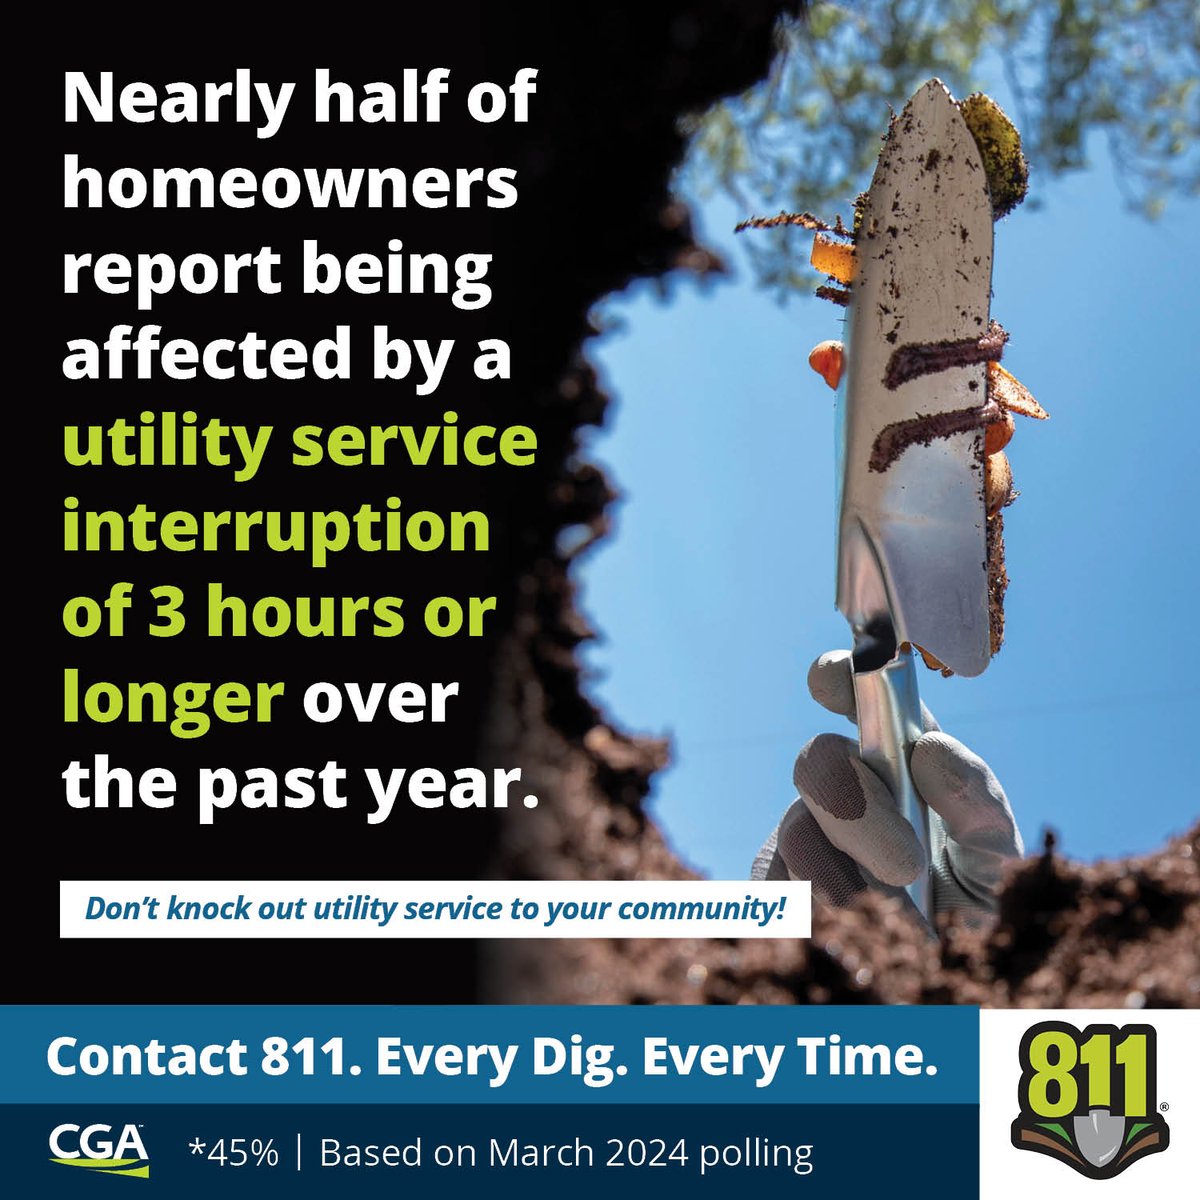 Don't be a neighbor that knocks out power or internet.. digsafe.com or 811 every time, friends. #SafeDiggingMonth @CGAConnect